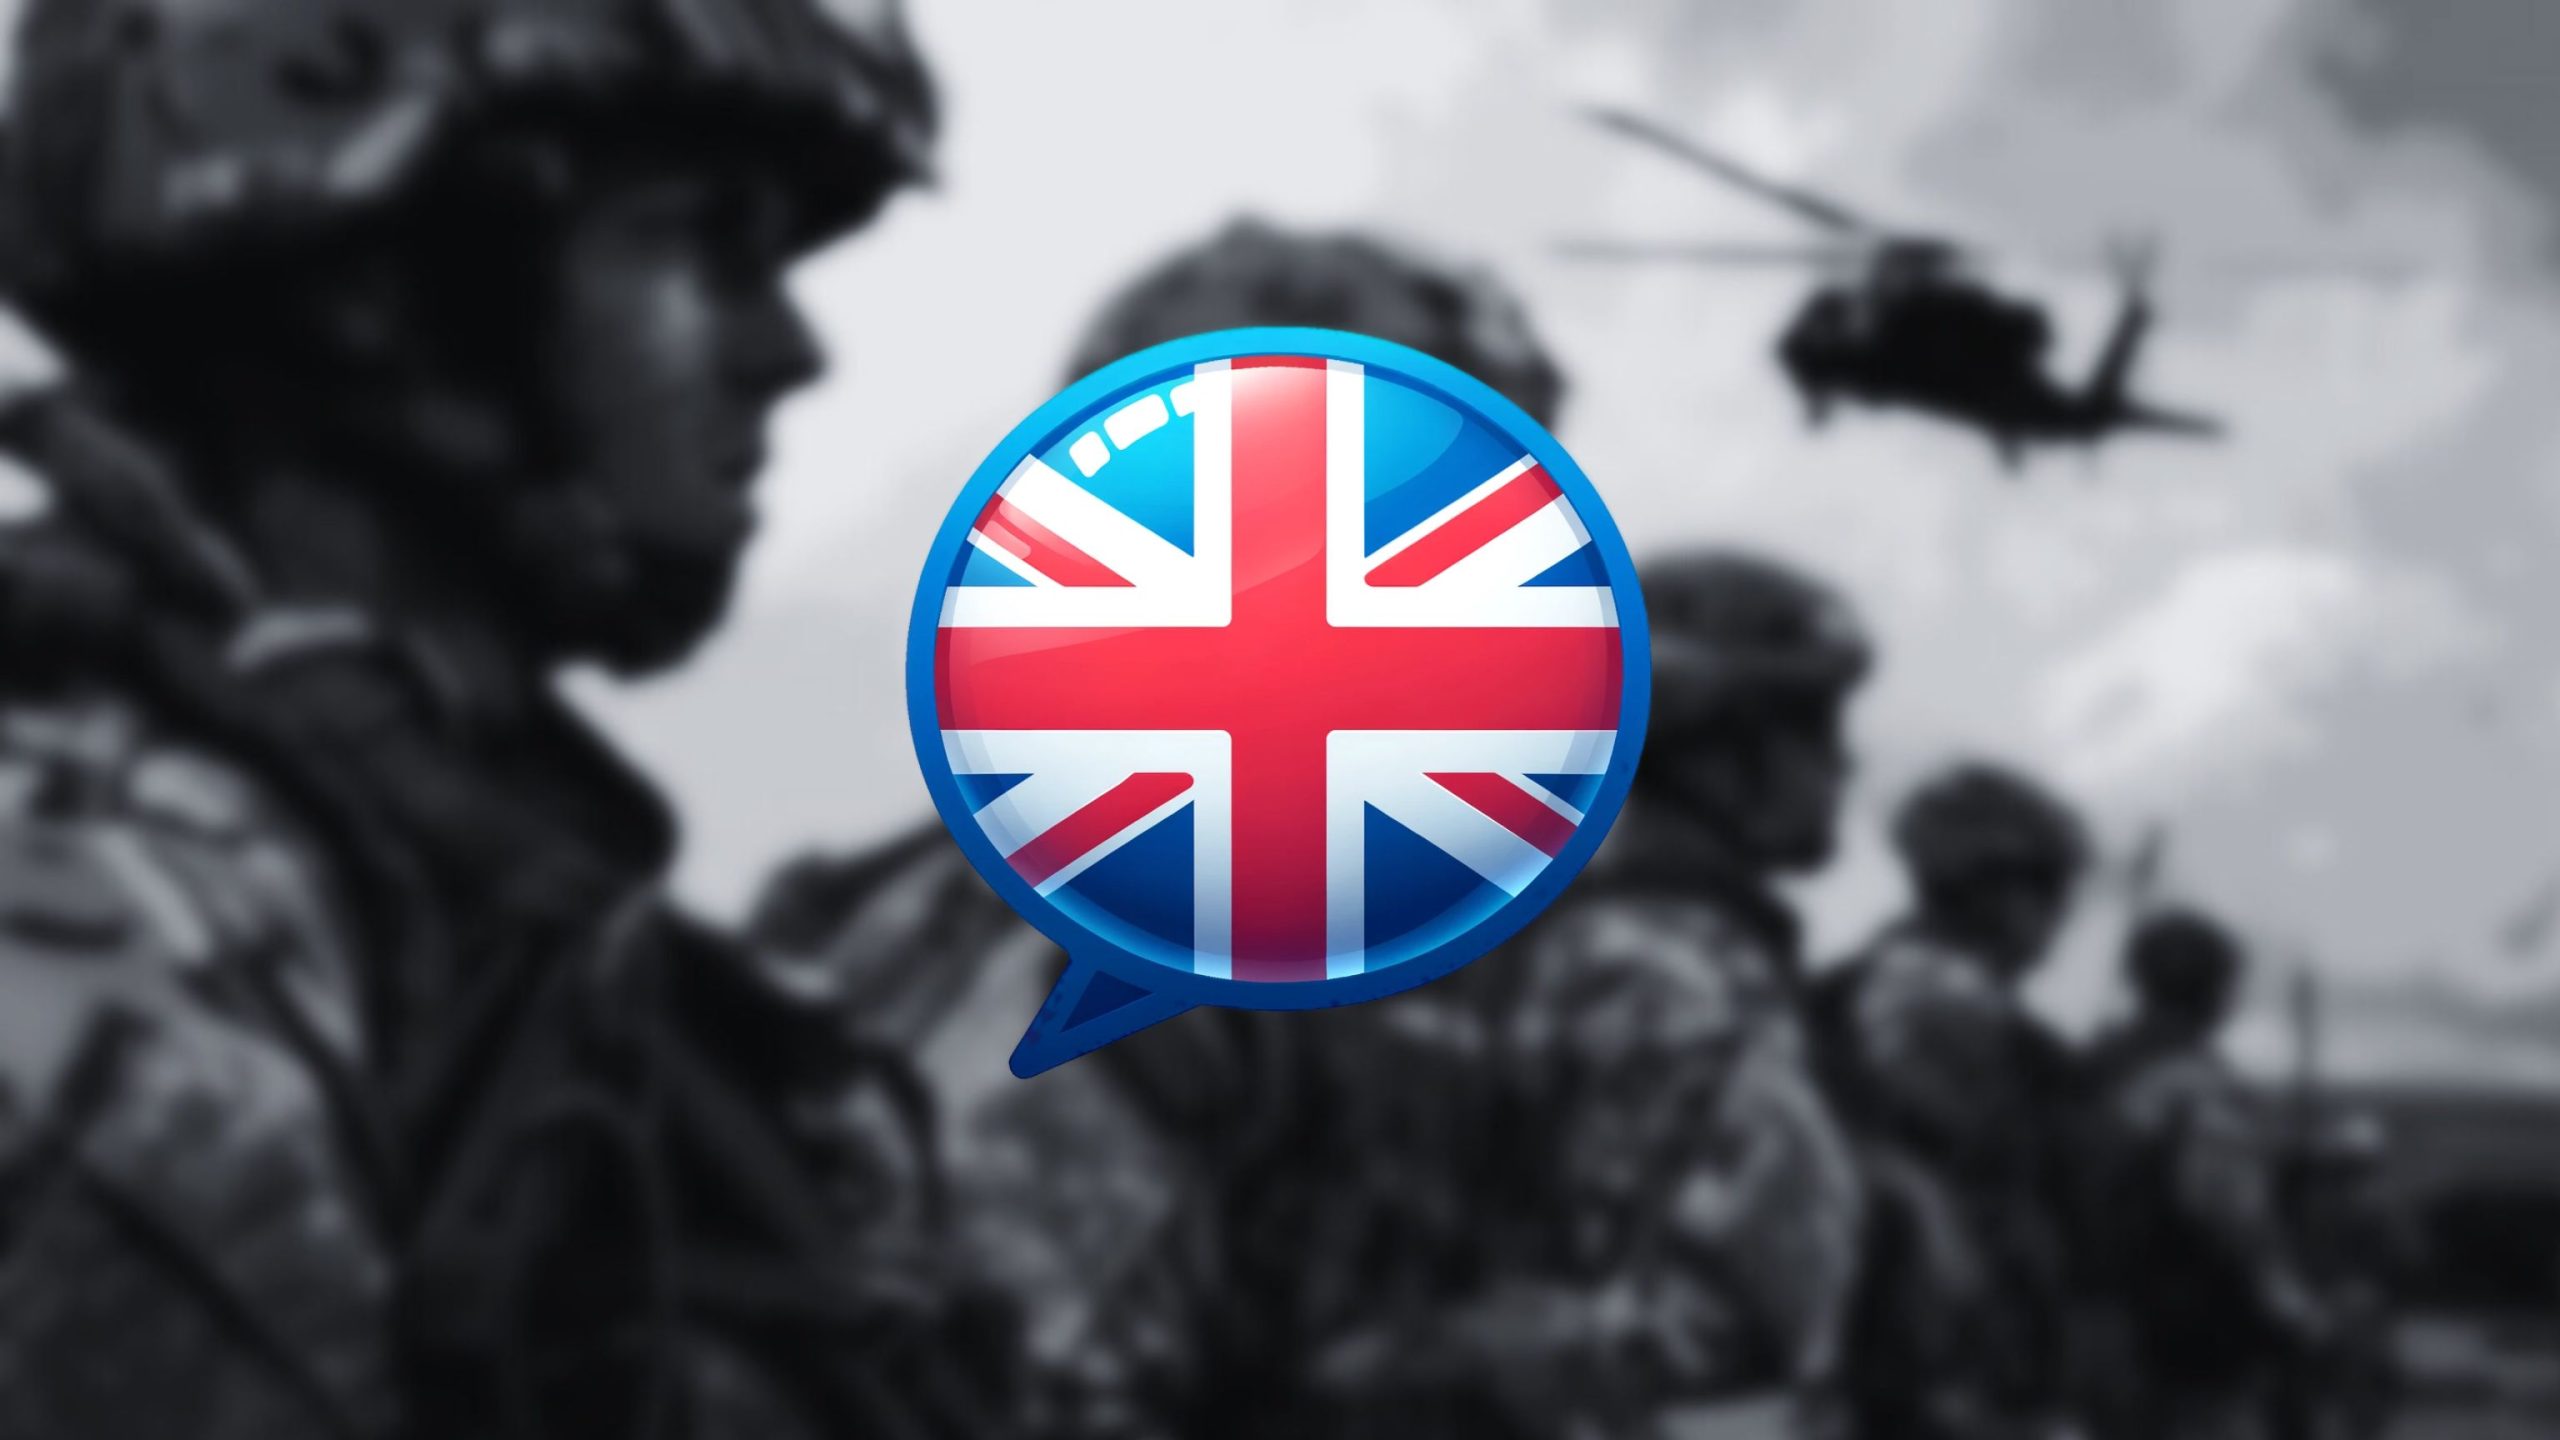 UK Army Unit Labeled Accurate COVID Reporting as “Malinformation”